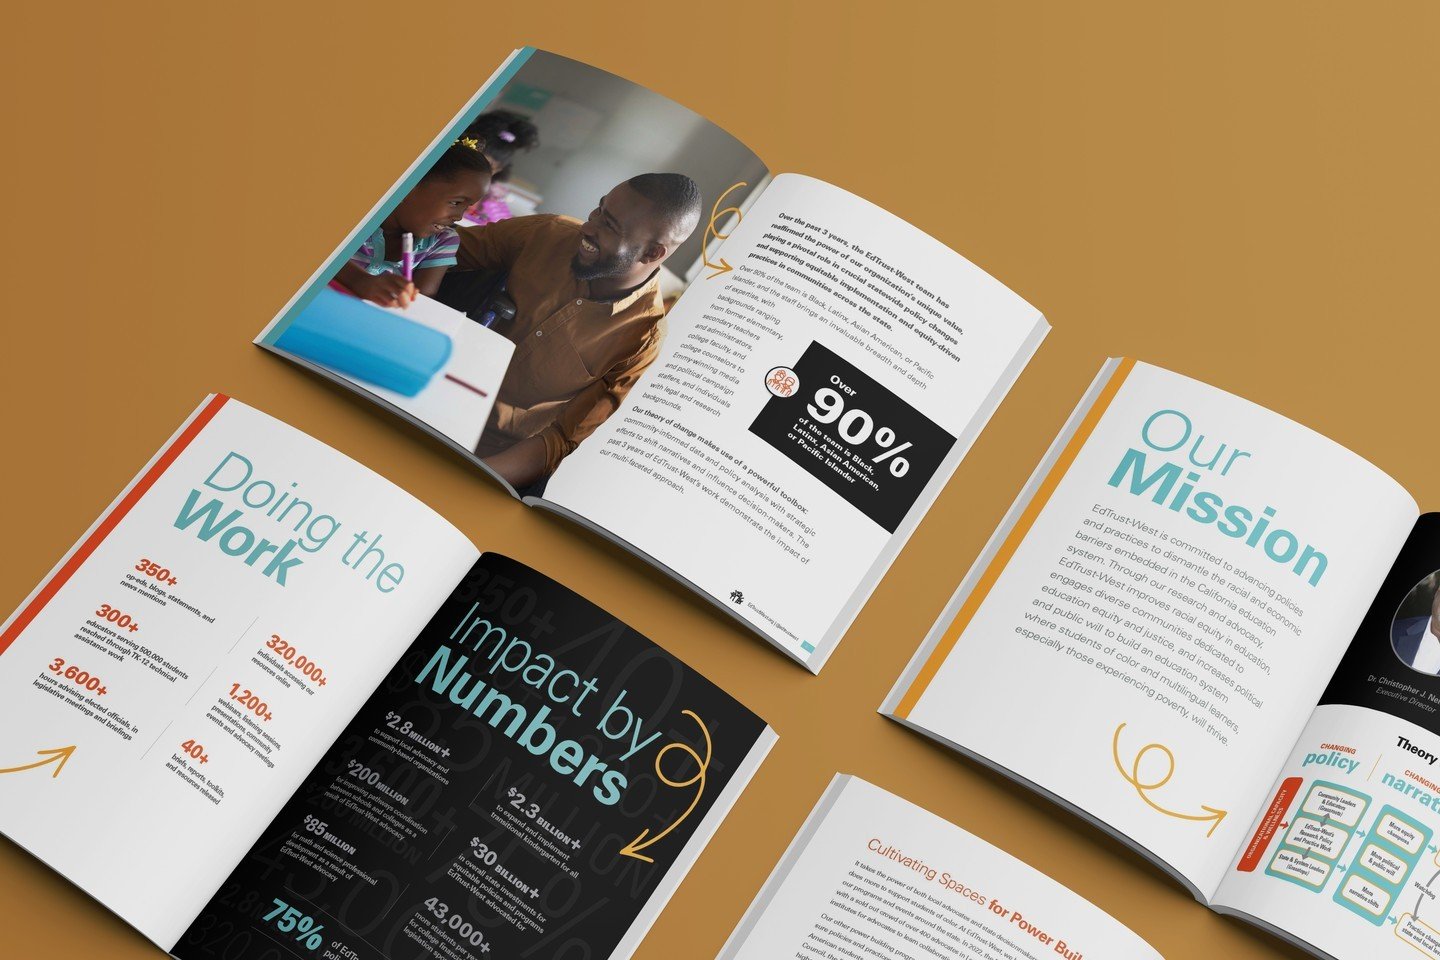 My first-ever project with @edtrustwest (ETW) was designing their 2019 Annual Report.

Four month later, we knocked it out of the park together again, if I do say so myself!

Instead of an Annual Report this year, the ETW team opted to do an Impact R